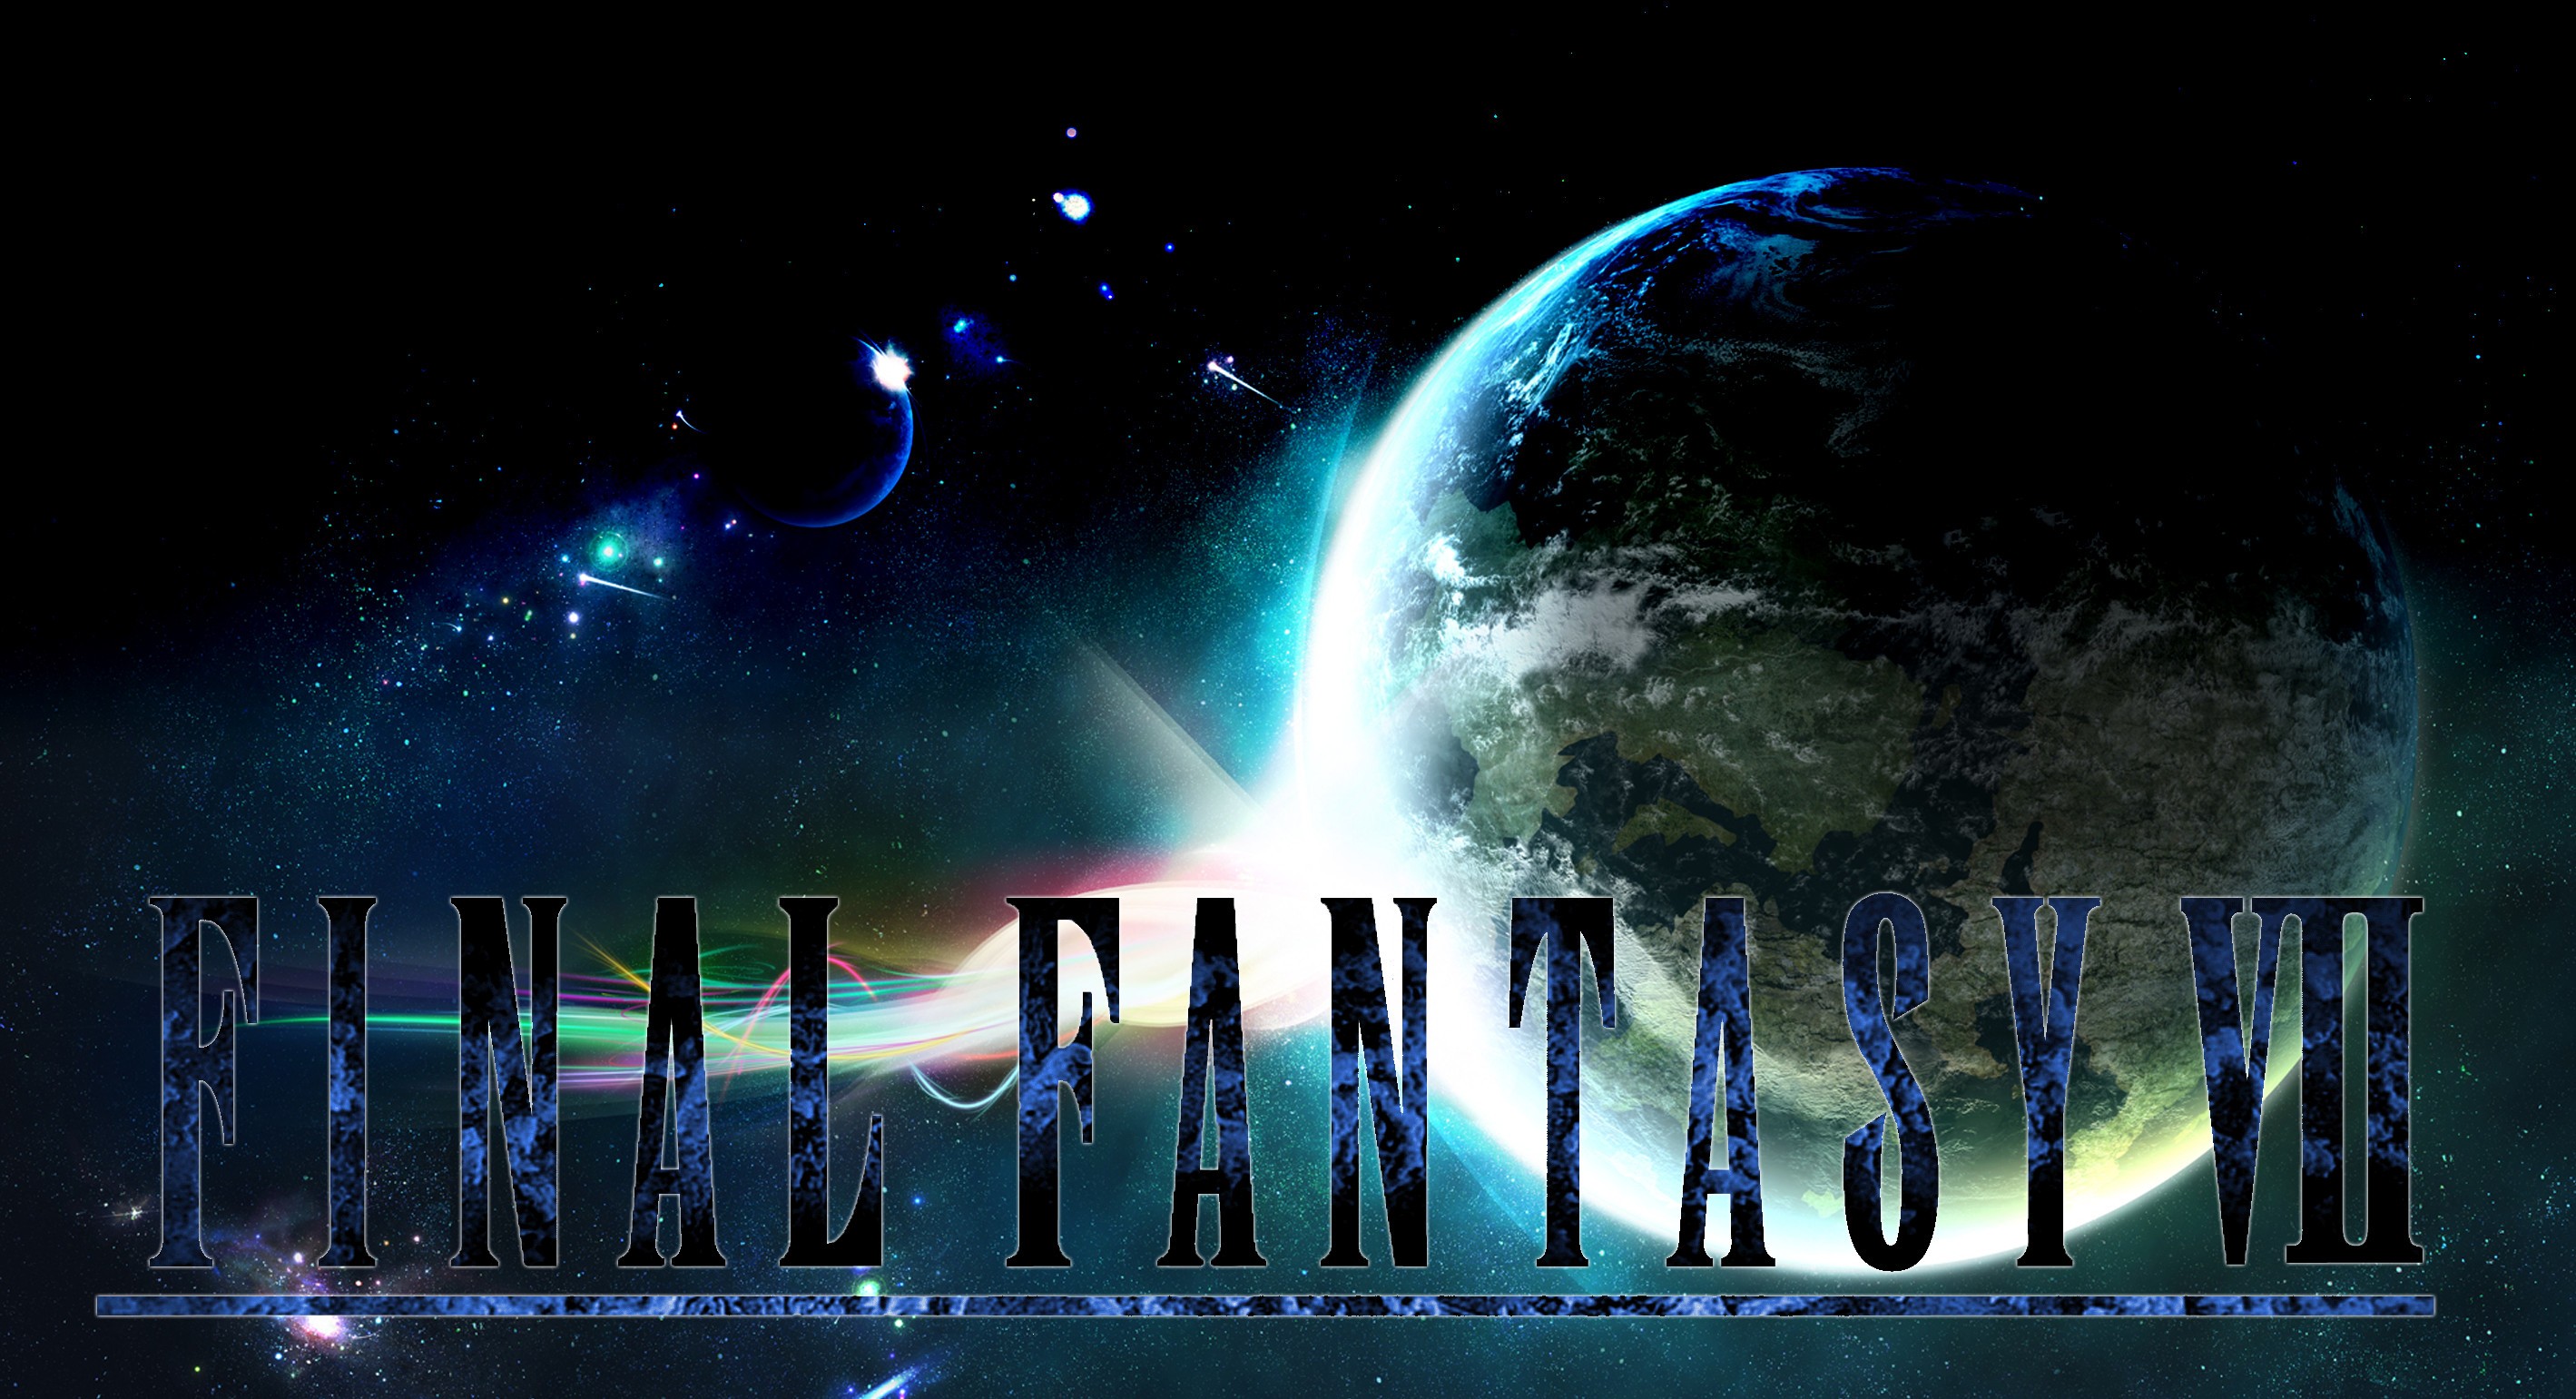 Final Fantasy VII wallpaper ·① Download free awesome full HD backgrounds for desktop and mobile ...